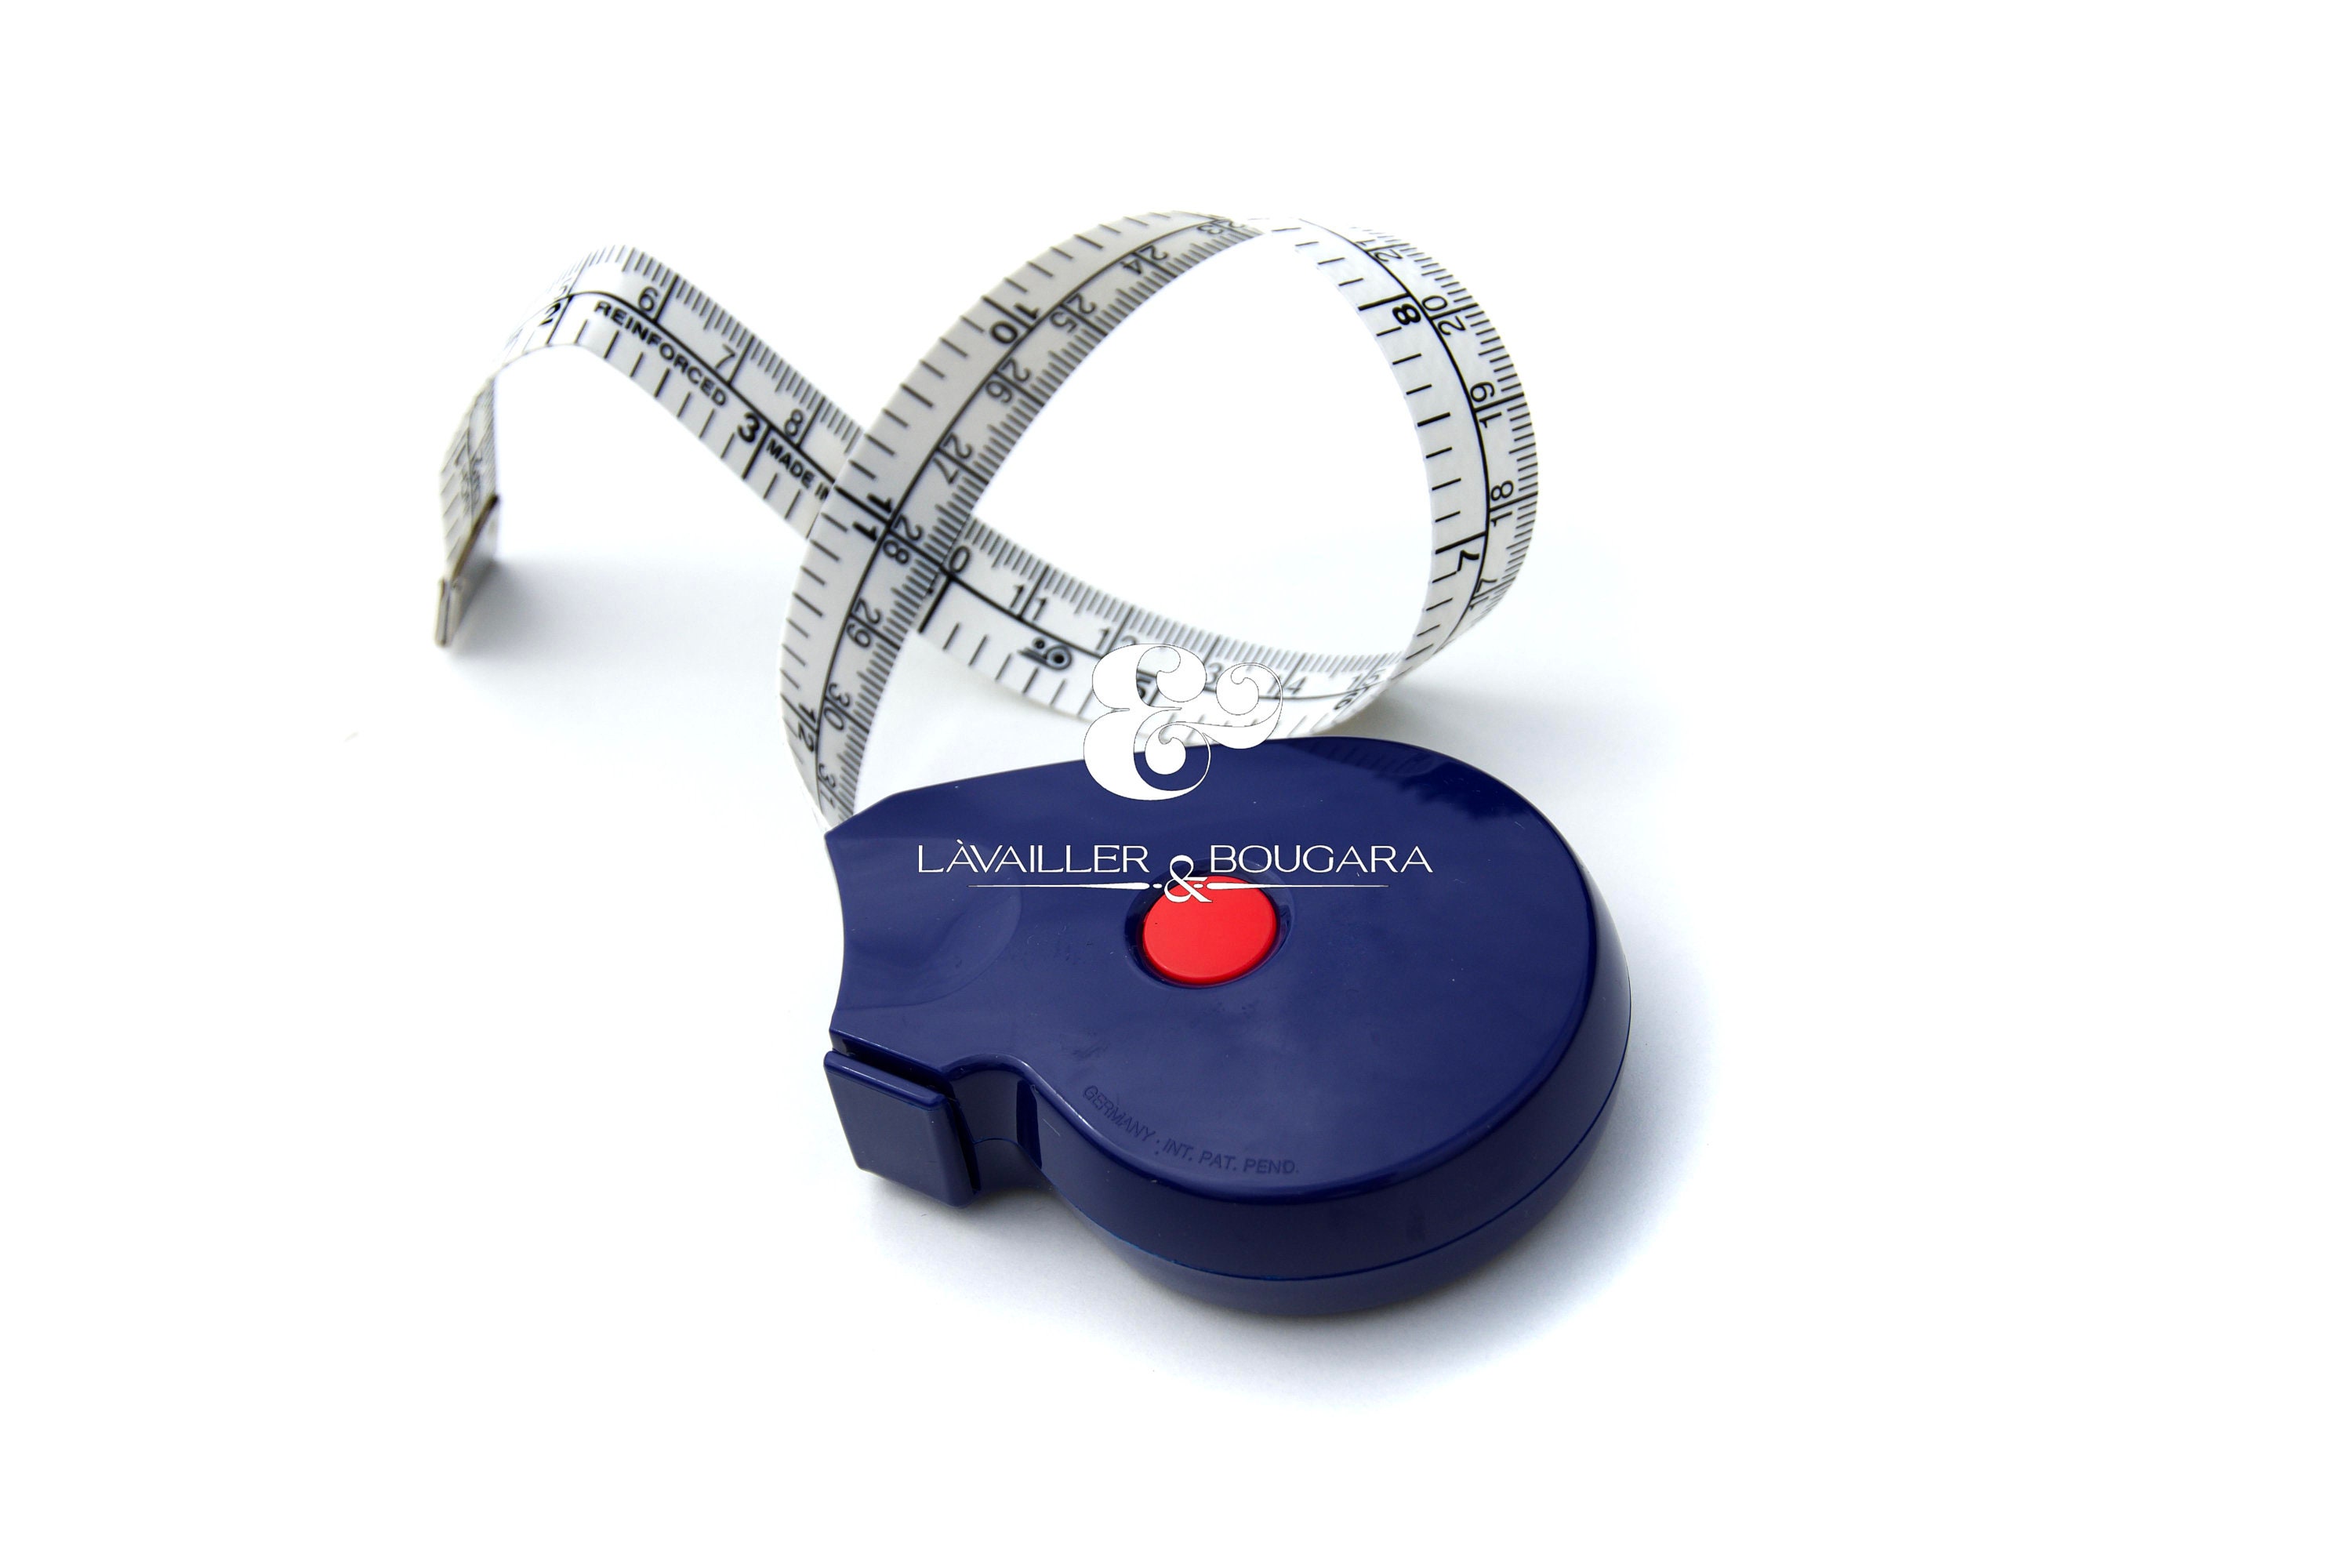 Retractable Sewing Tape Measure 60 inch Tailor Seamstress, Size: Standard